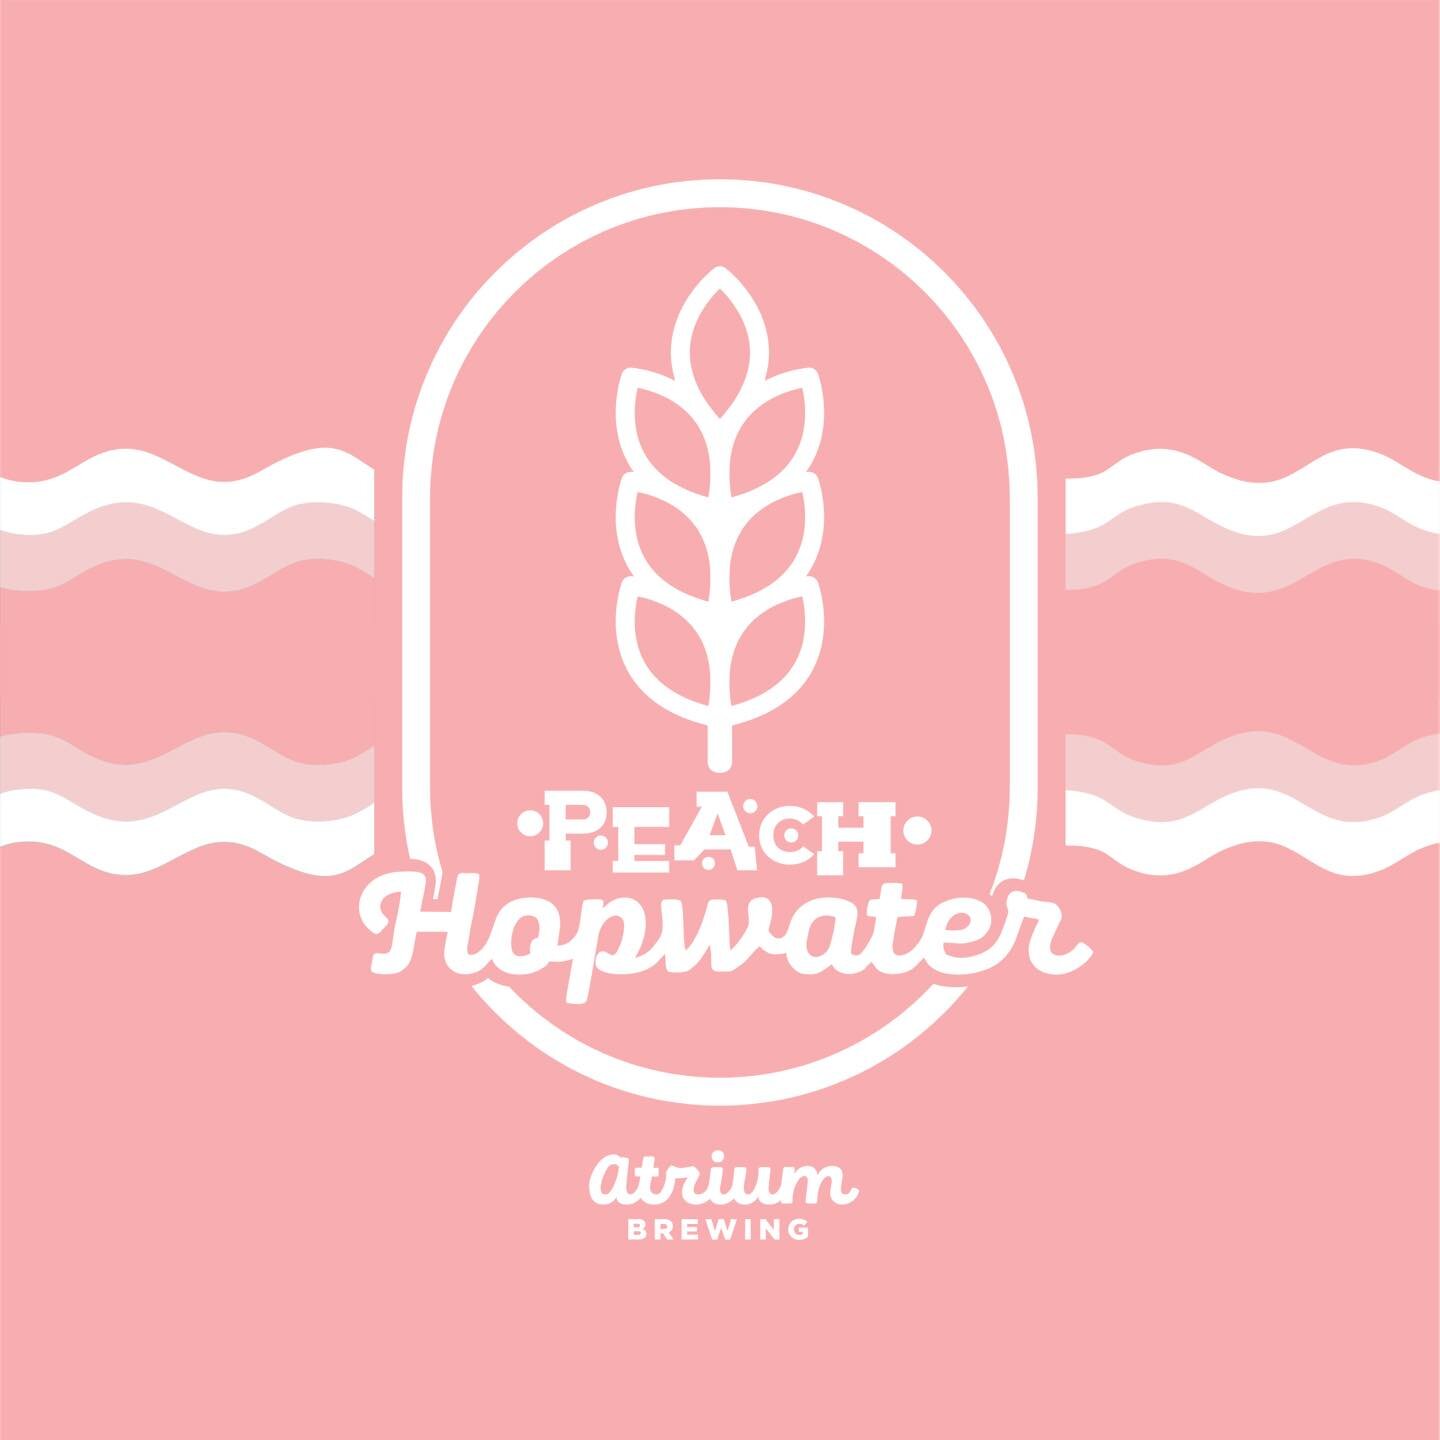 🎉NORTON COMMONS DRAFT EXCLUSIVE🎉
Today(5/19)

🫧Peach Hopwater🫧

We hear you loud and clear. We&rsquo;re excited to announce the second in our ever expanding series of Hopwater . Lotus and Idaho 7 hops, peach, and loooooots of co2 bubbles🫧

We&rs